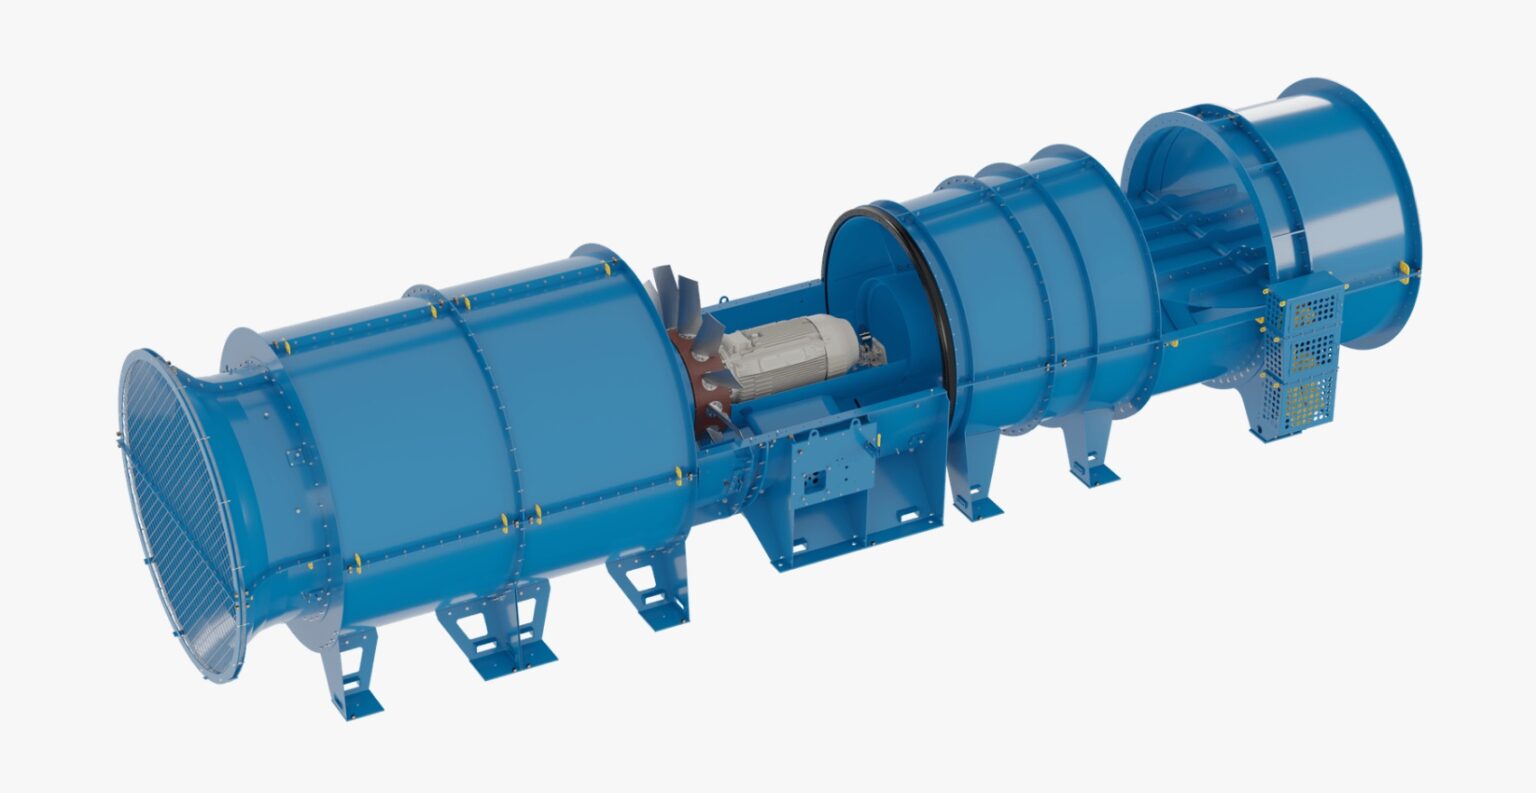 Modular Design Redefines Mine Ventilation Efficiency and Availability